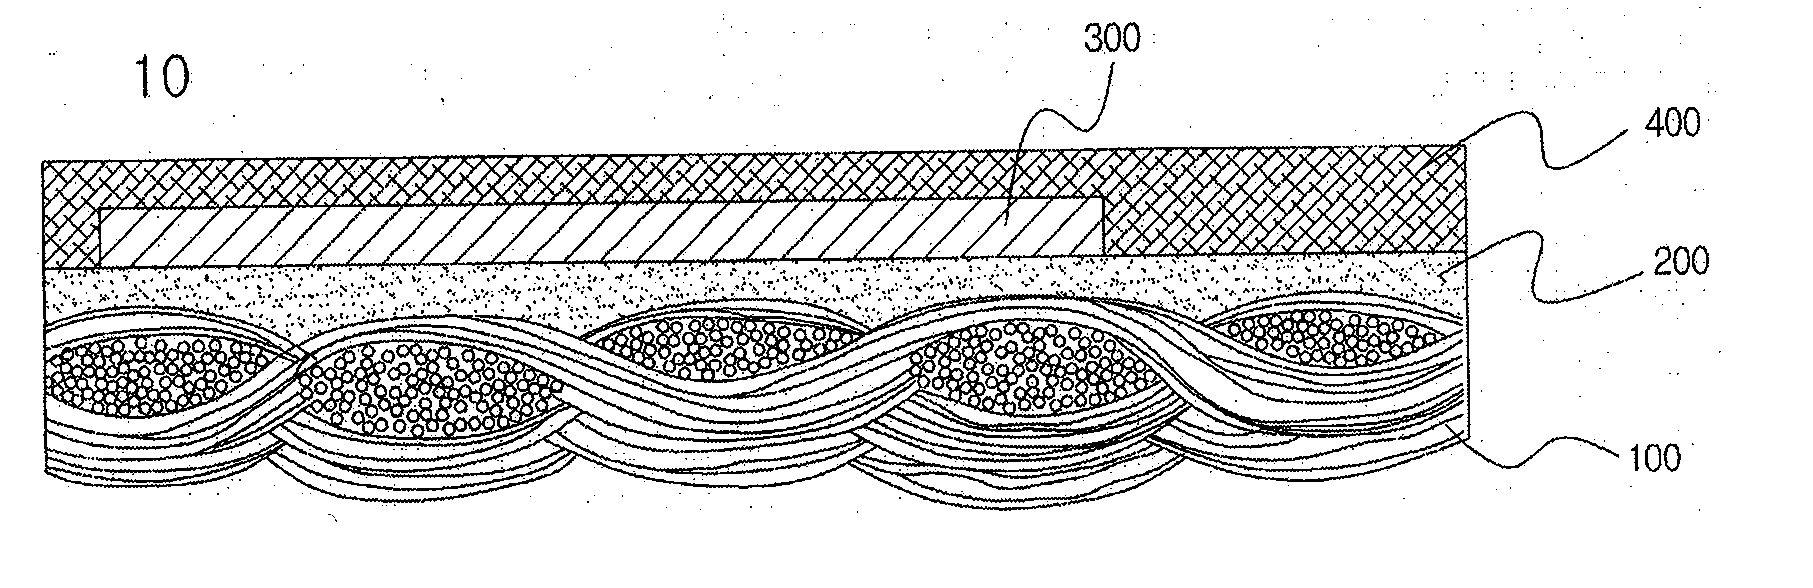 Flexible printed conductive fabric and method for fabricating the same